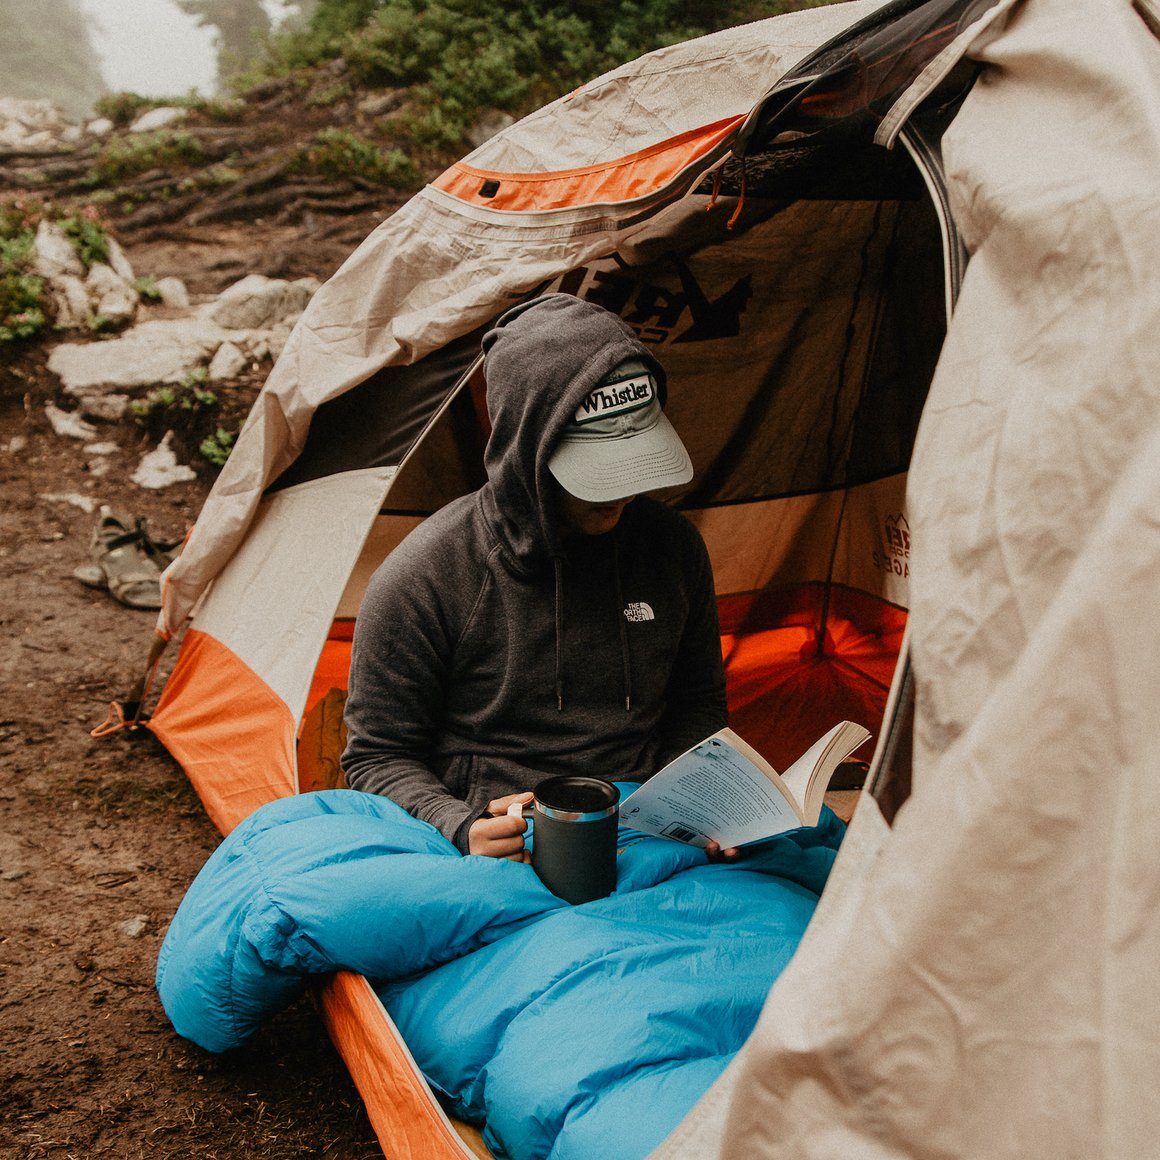 With the "bivy" in Zenbivy, we're referencing the traditional use of the word "bivouac" which refers to a "minimal encampment". Zen = peaceful & relaxed. Bivy = minimal camp. Zenbivy = Peaceful, minimal camp.